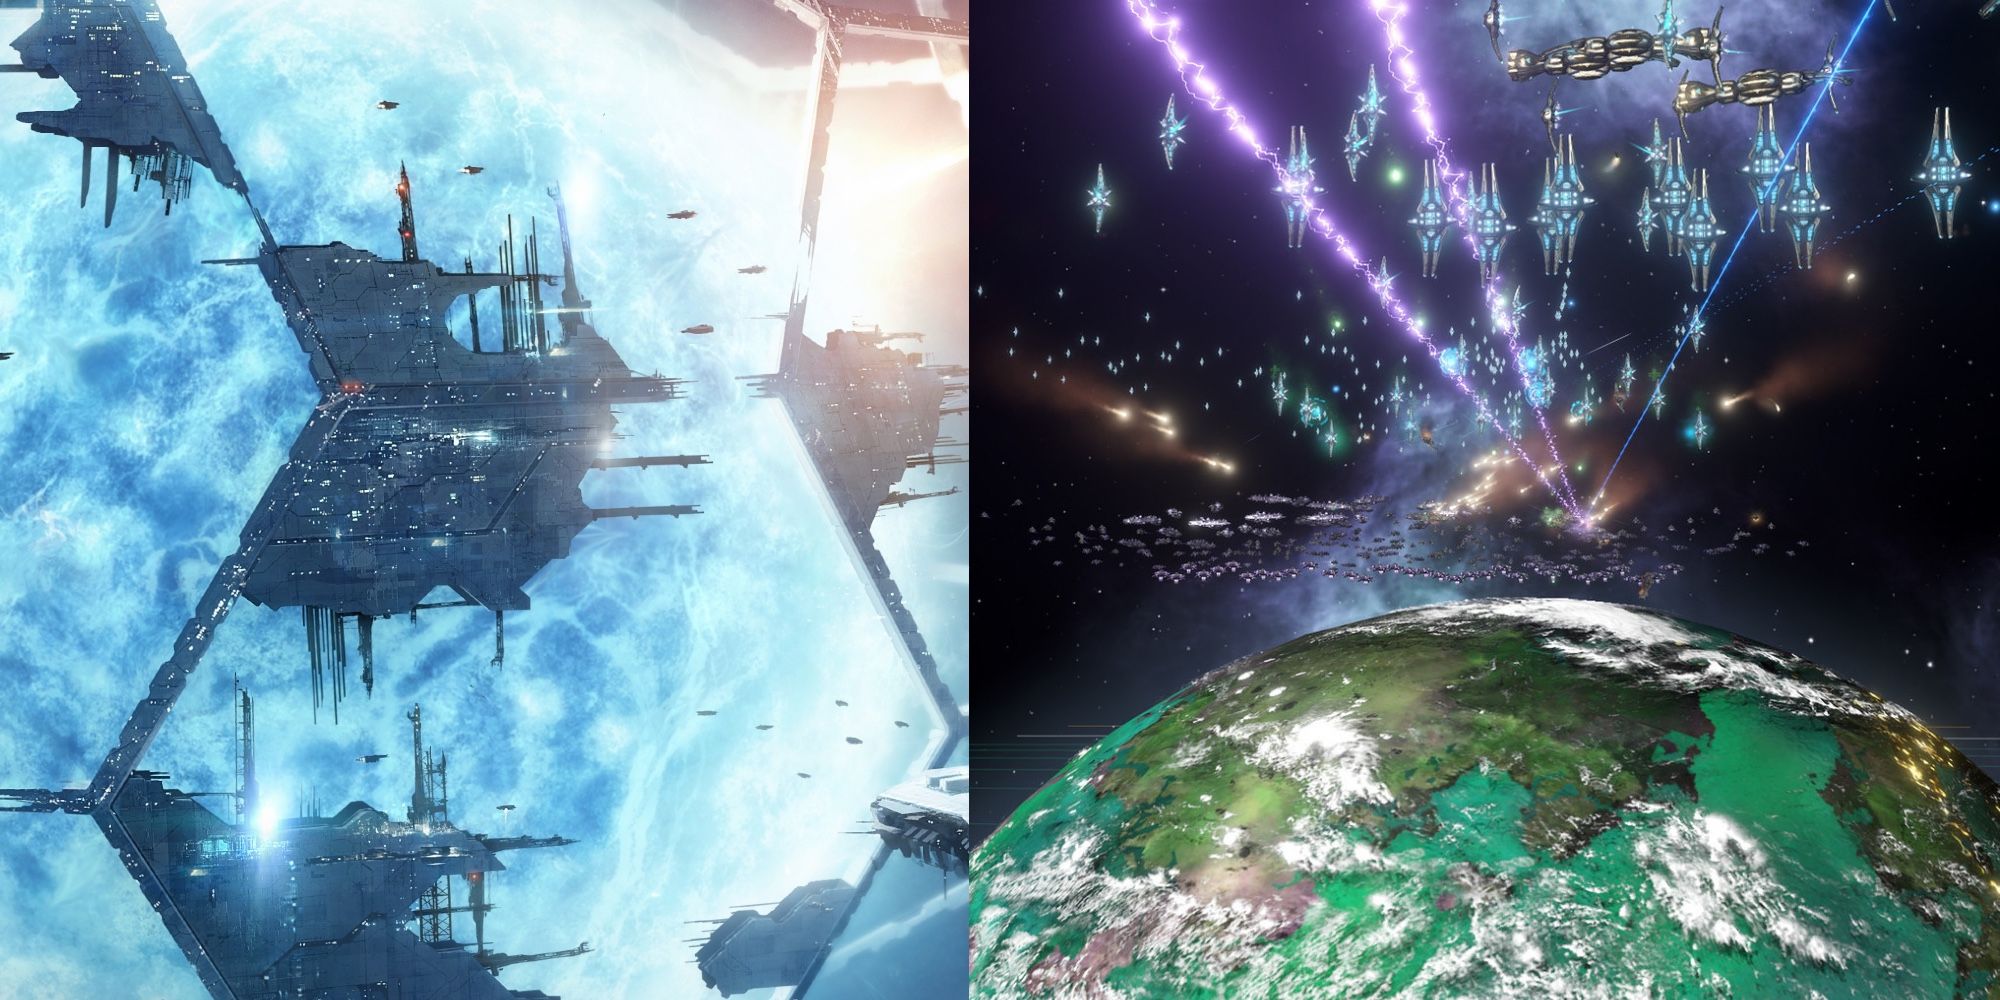 Two side-by-side images from Stellaris gameplay.